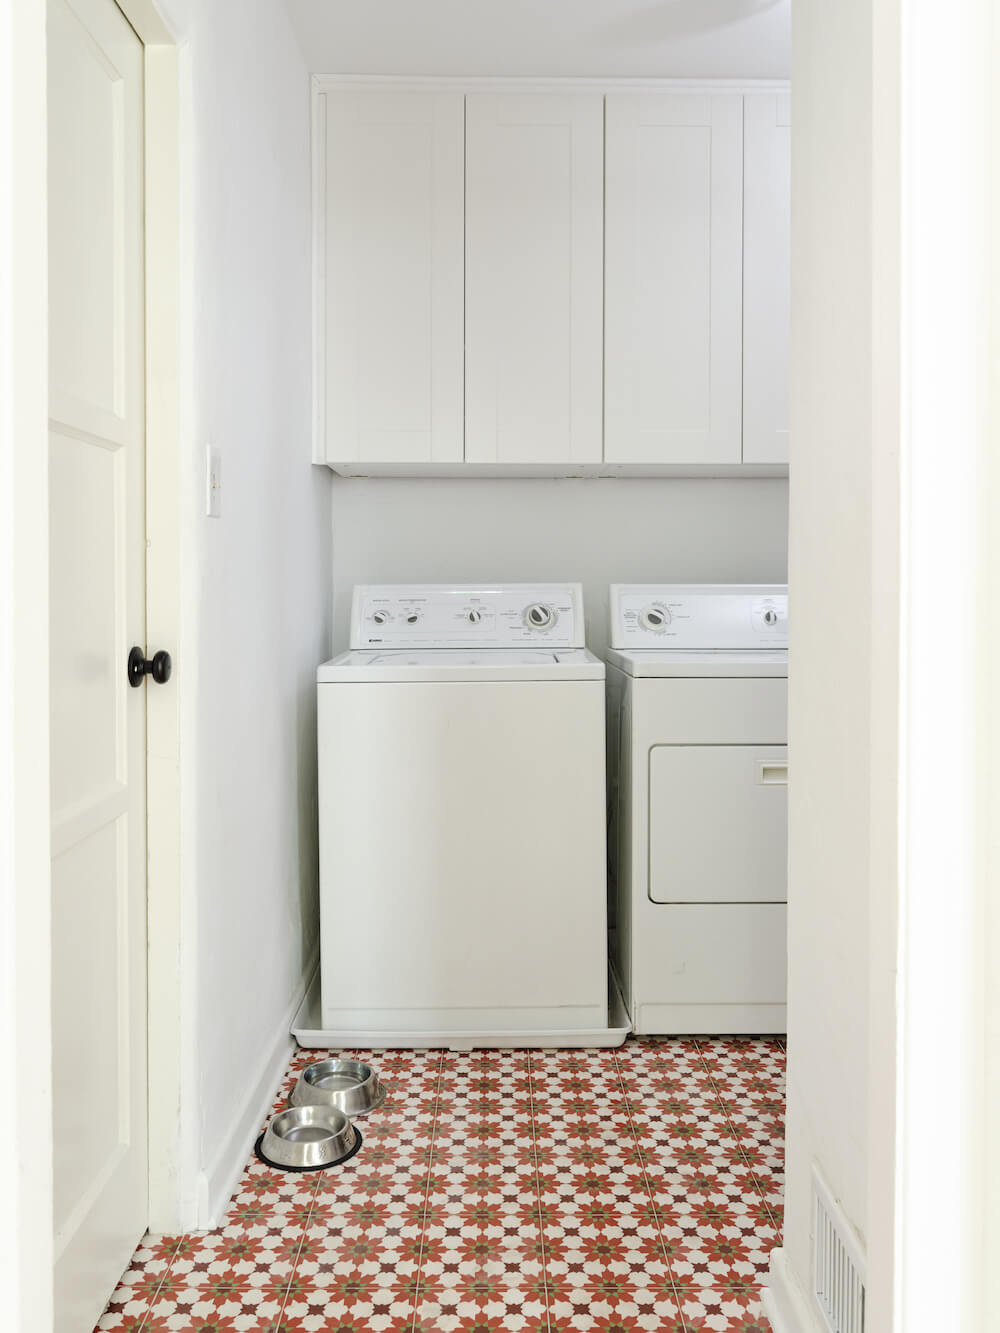 Laundry room with Moroccan floor tiles, white cabinets and white washer and dryer